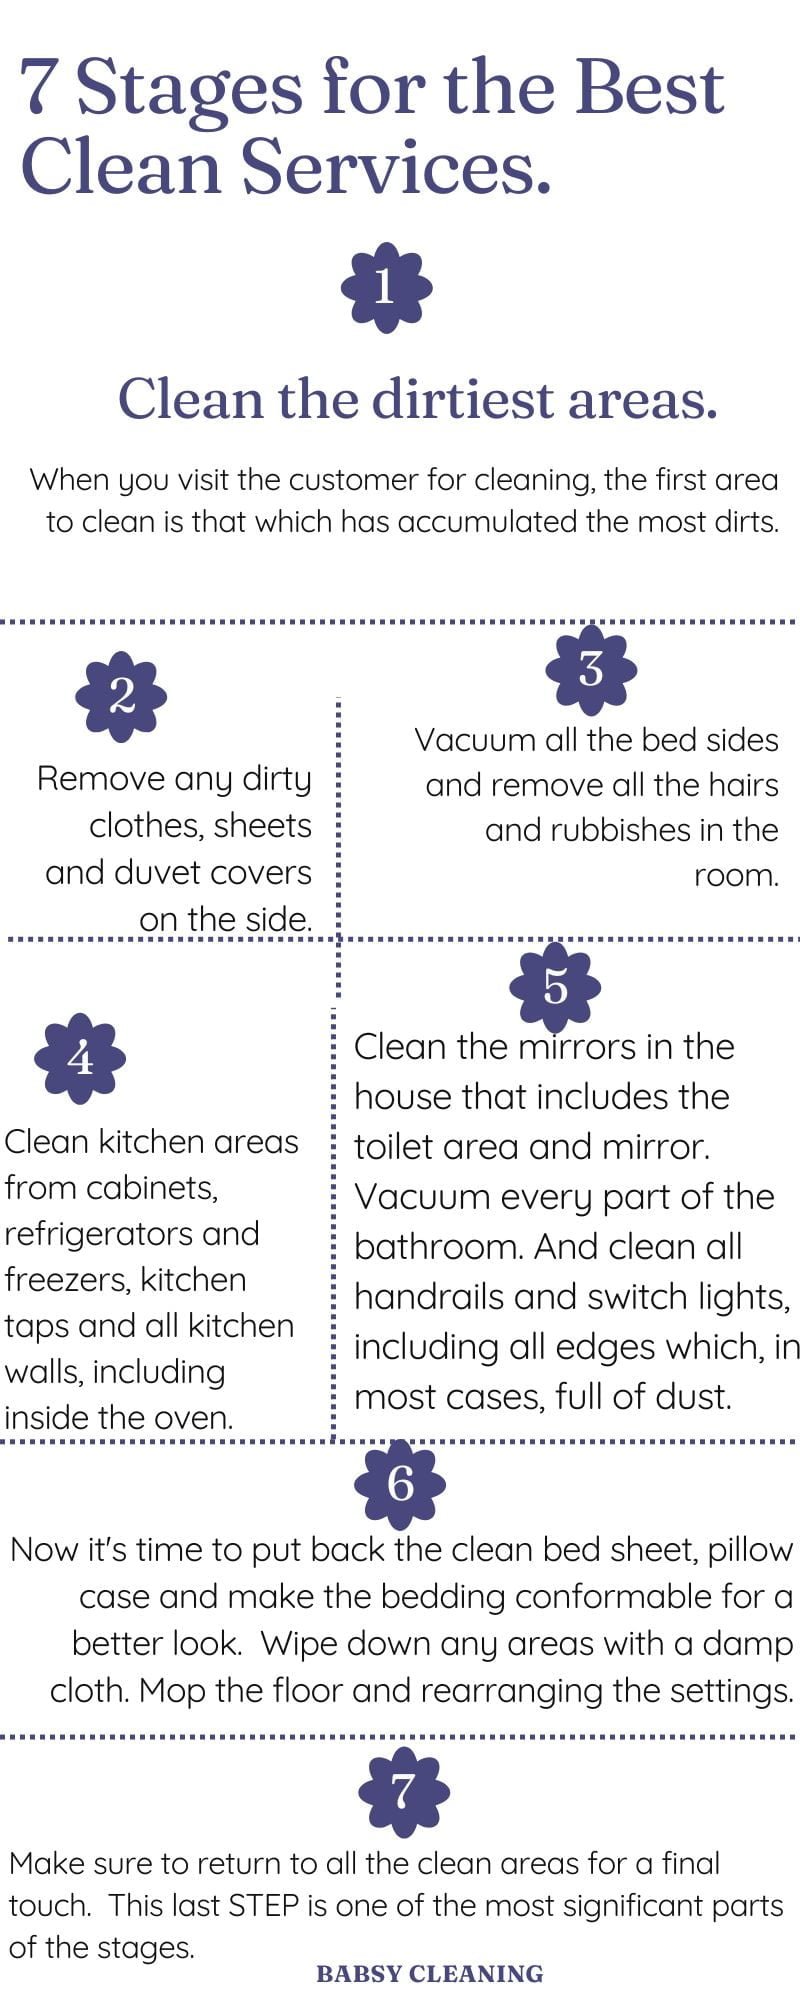 housekeeping services infographic